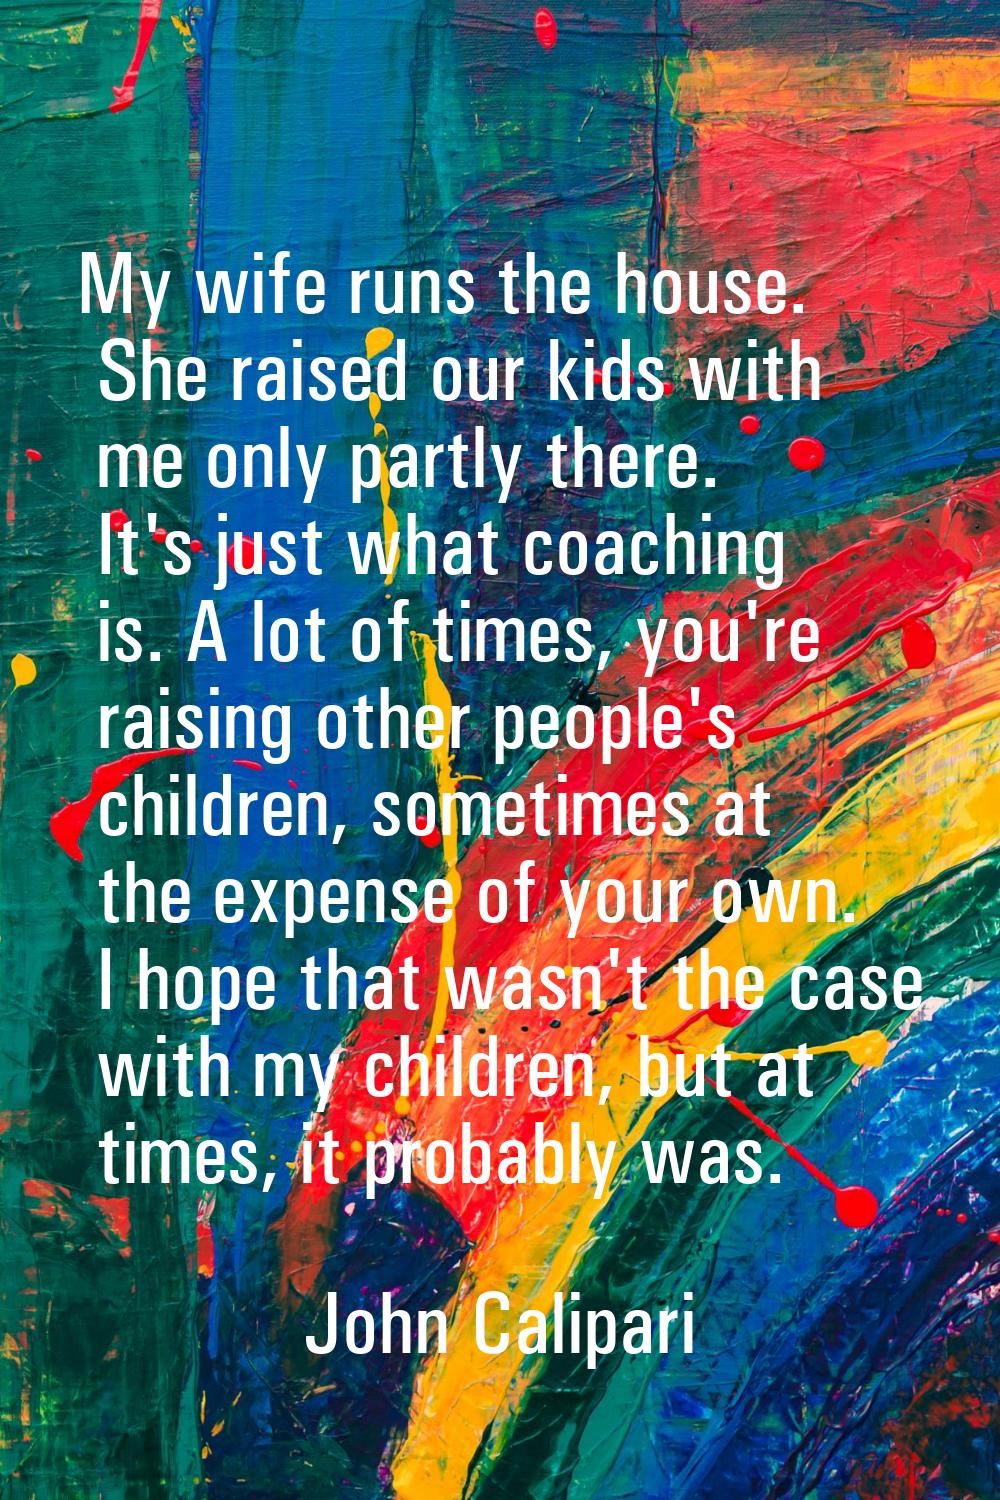 My wife runs the house. She raised our kids with me only partly there. It's just what coaching is. 